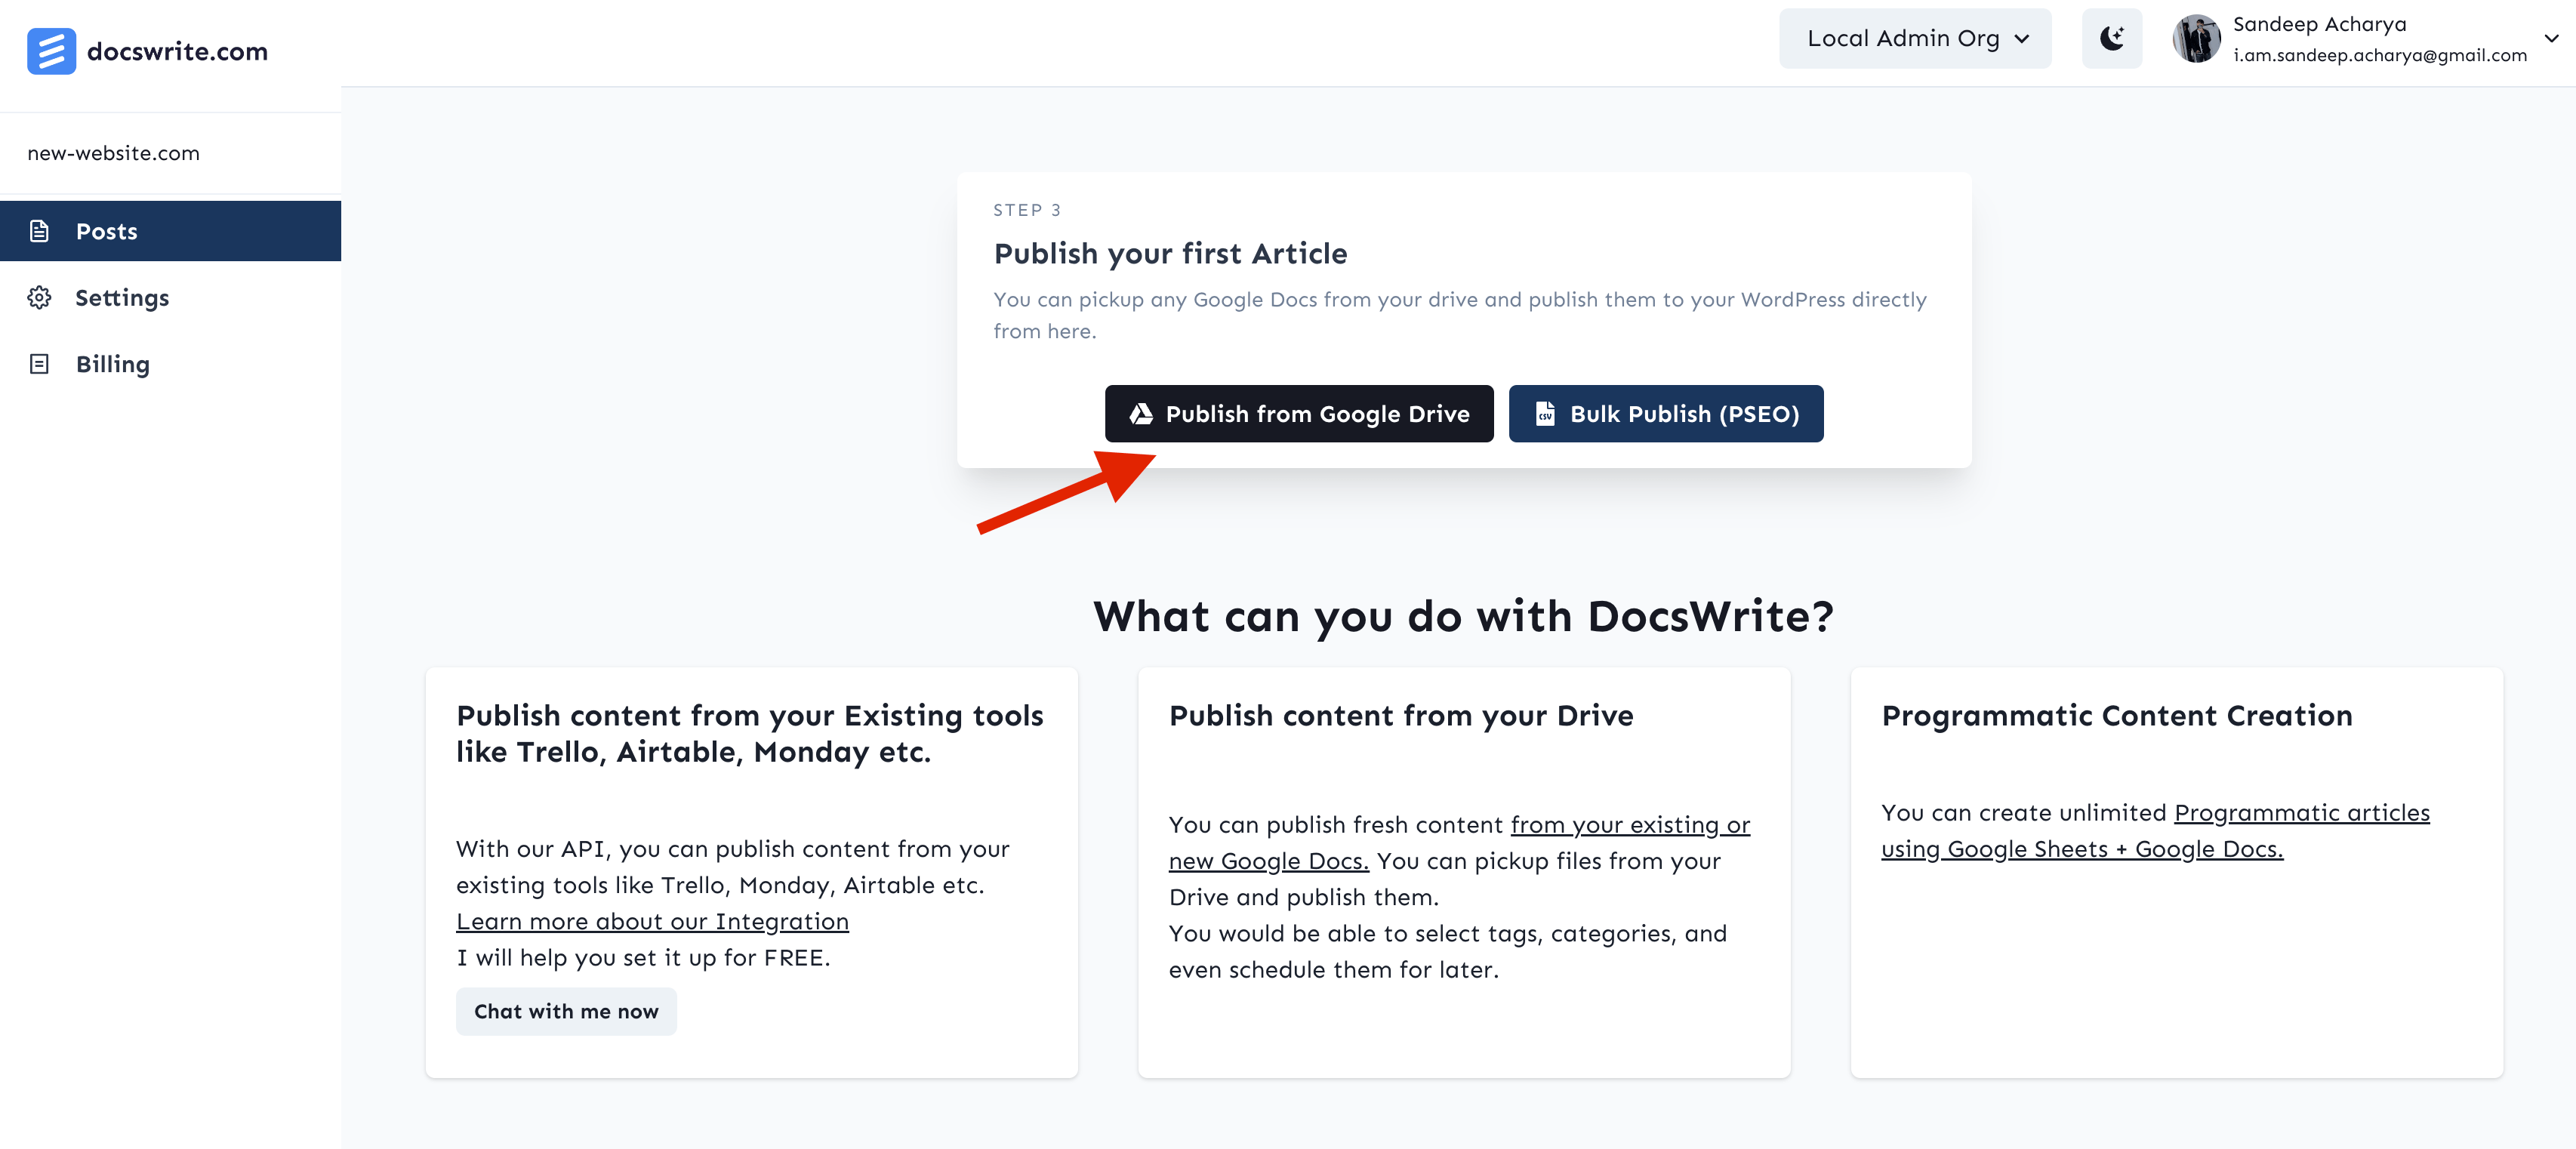 Docswrite Publish from Google Drive